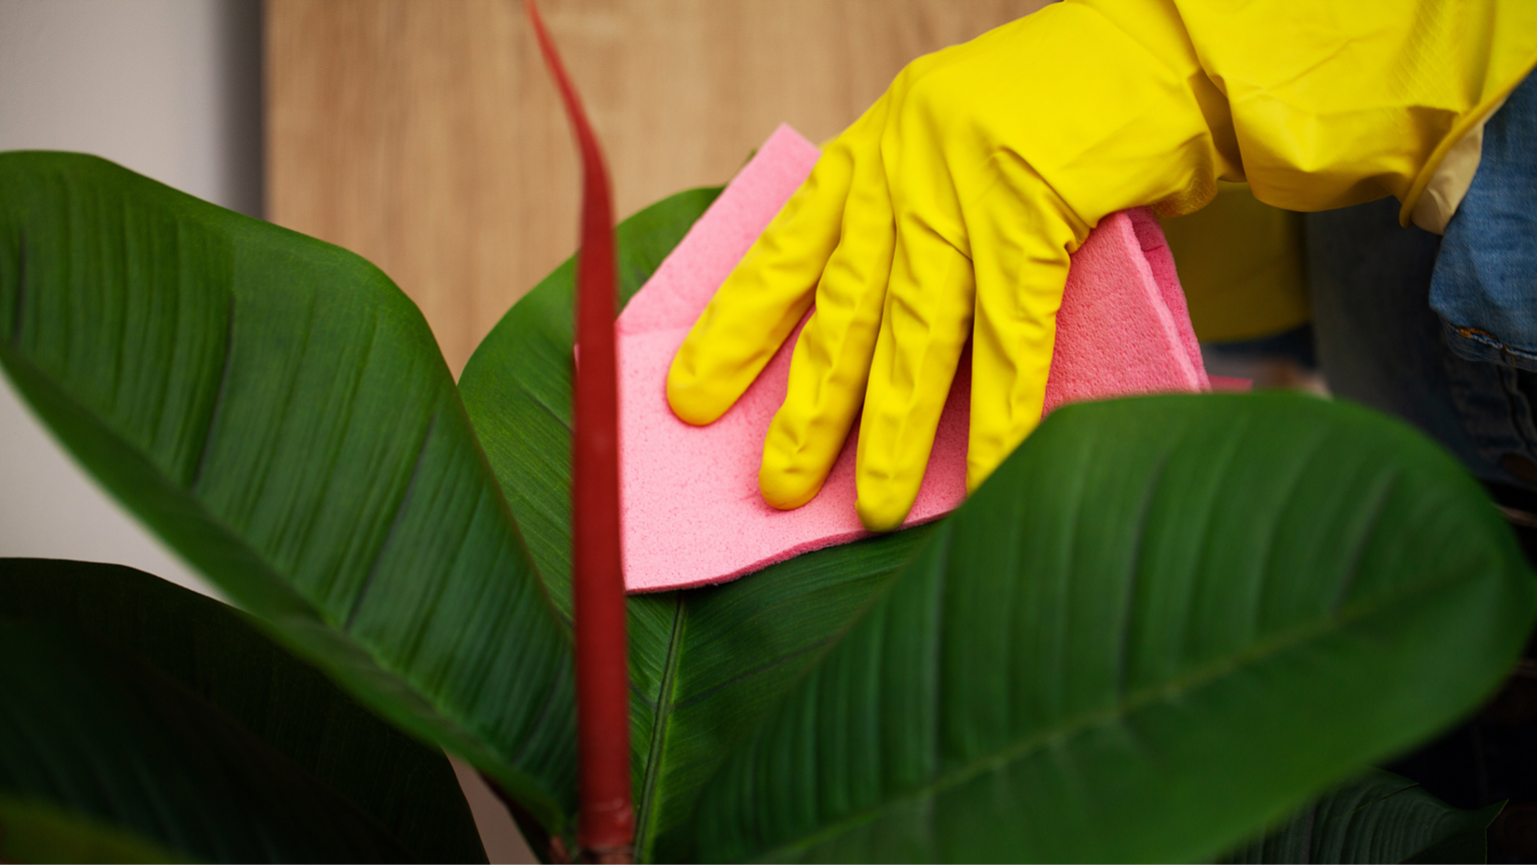 Green Cleaning Services In Overland Park Help Keep Offices Looking NEW